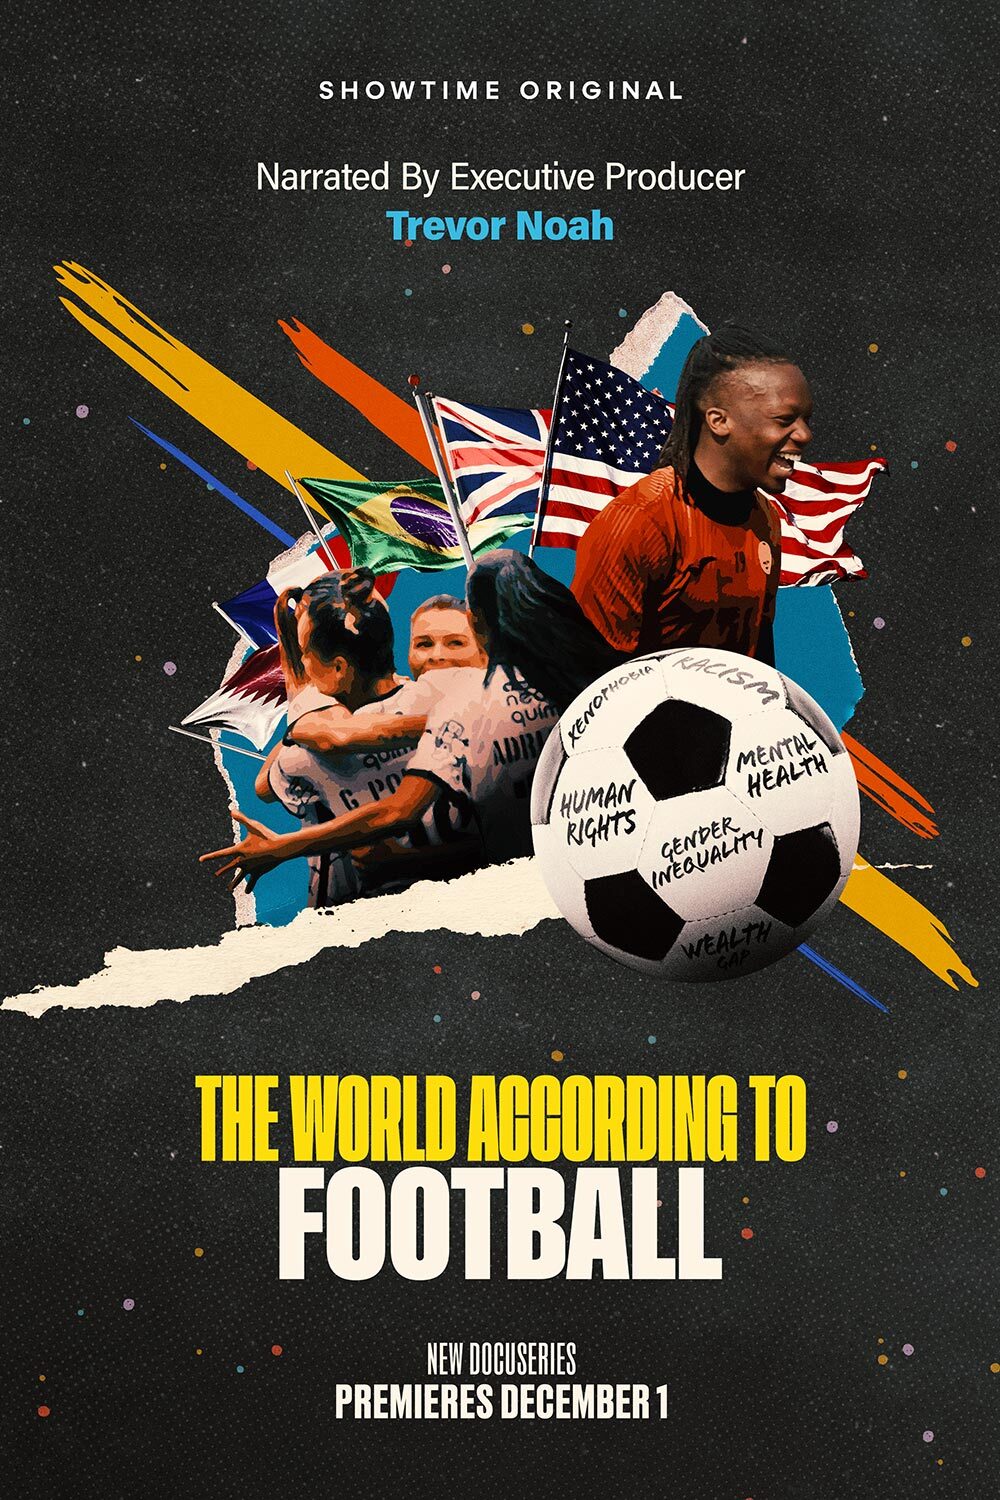 The World According to Football